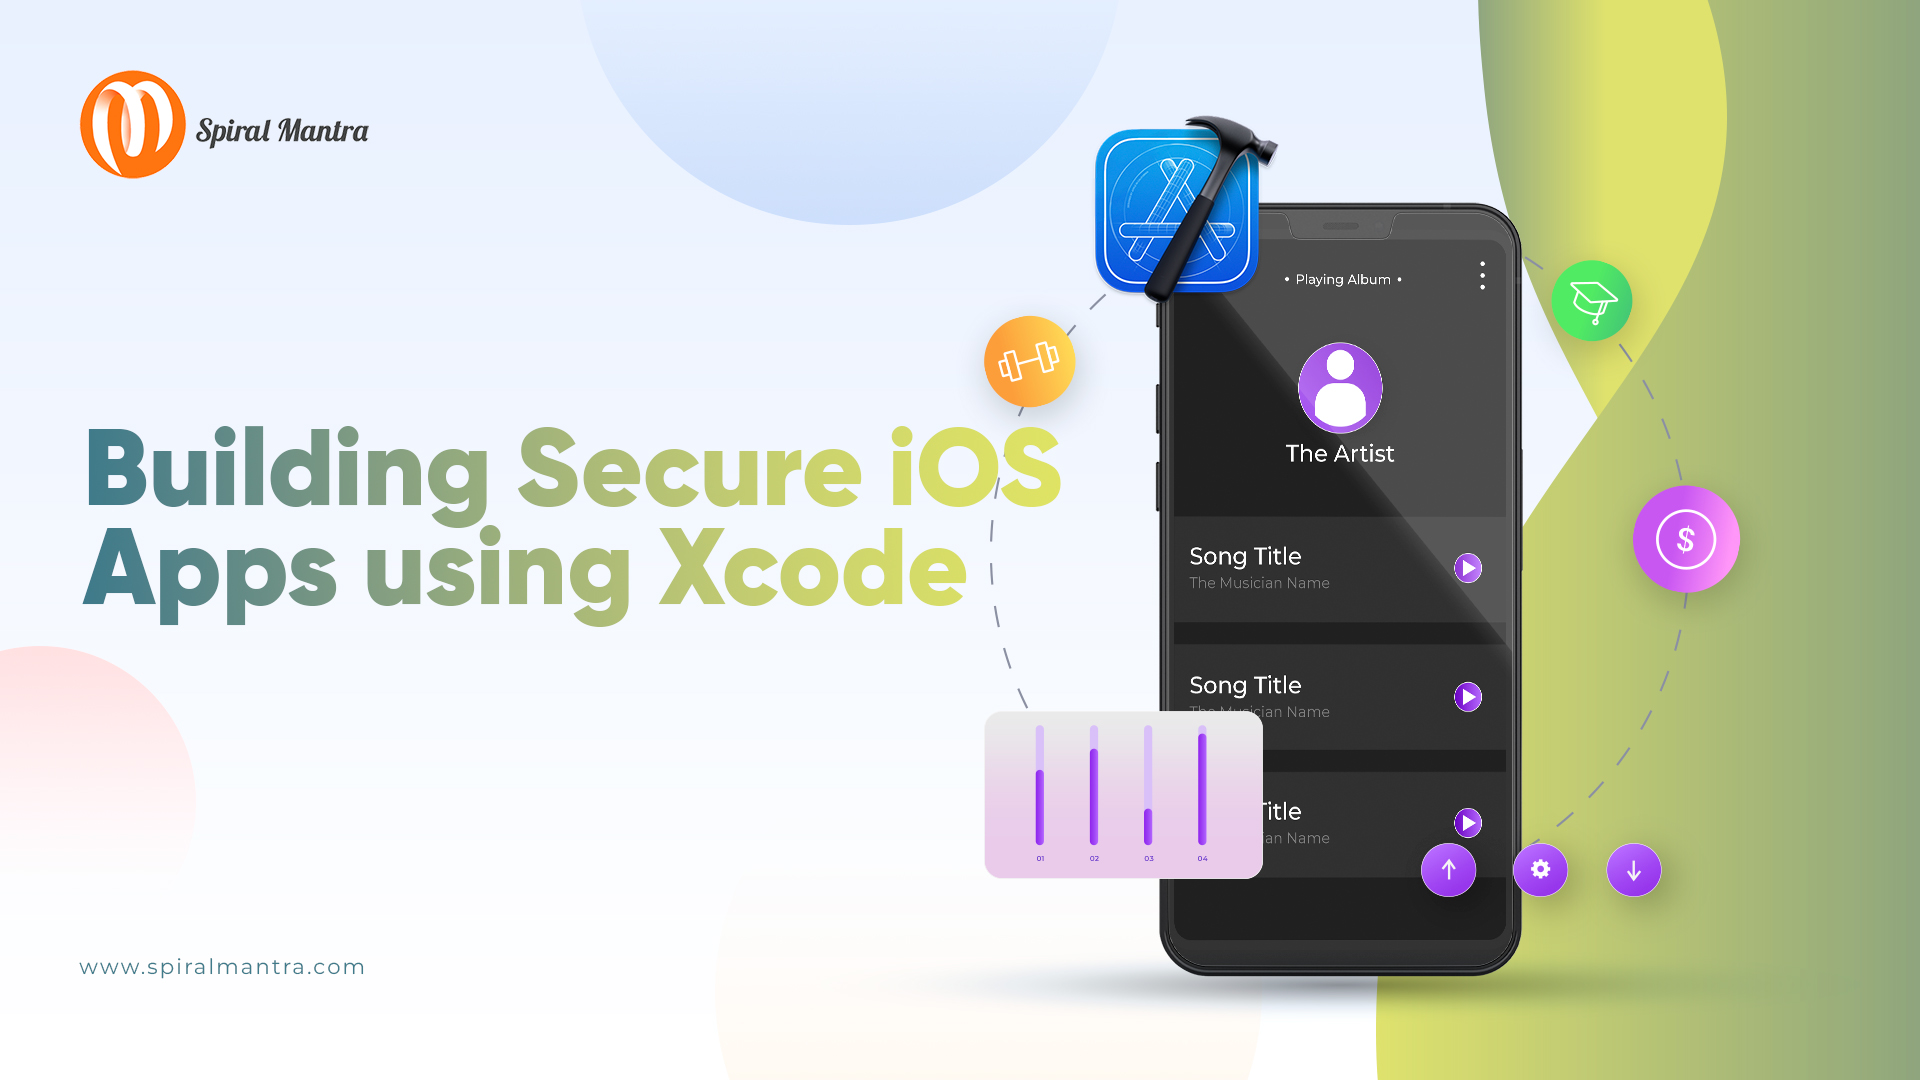 Building Secure iOS Apps using Xcode